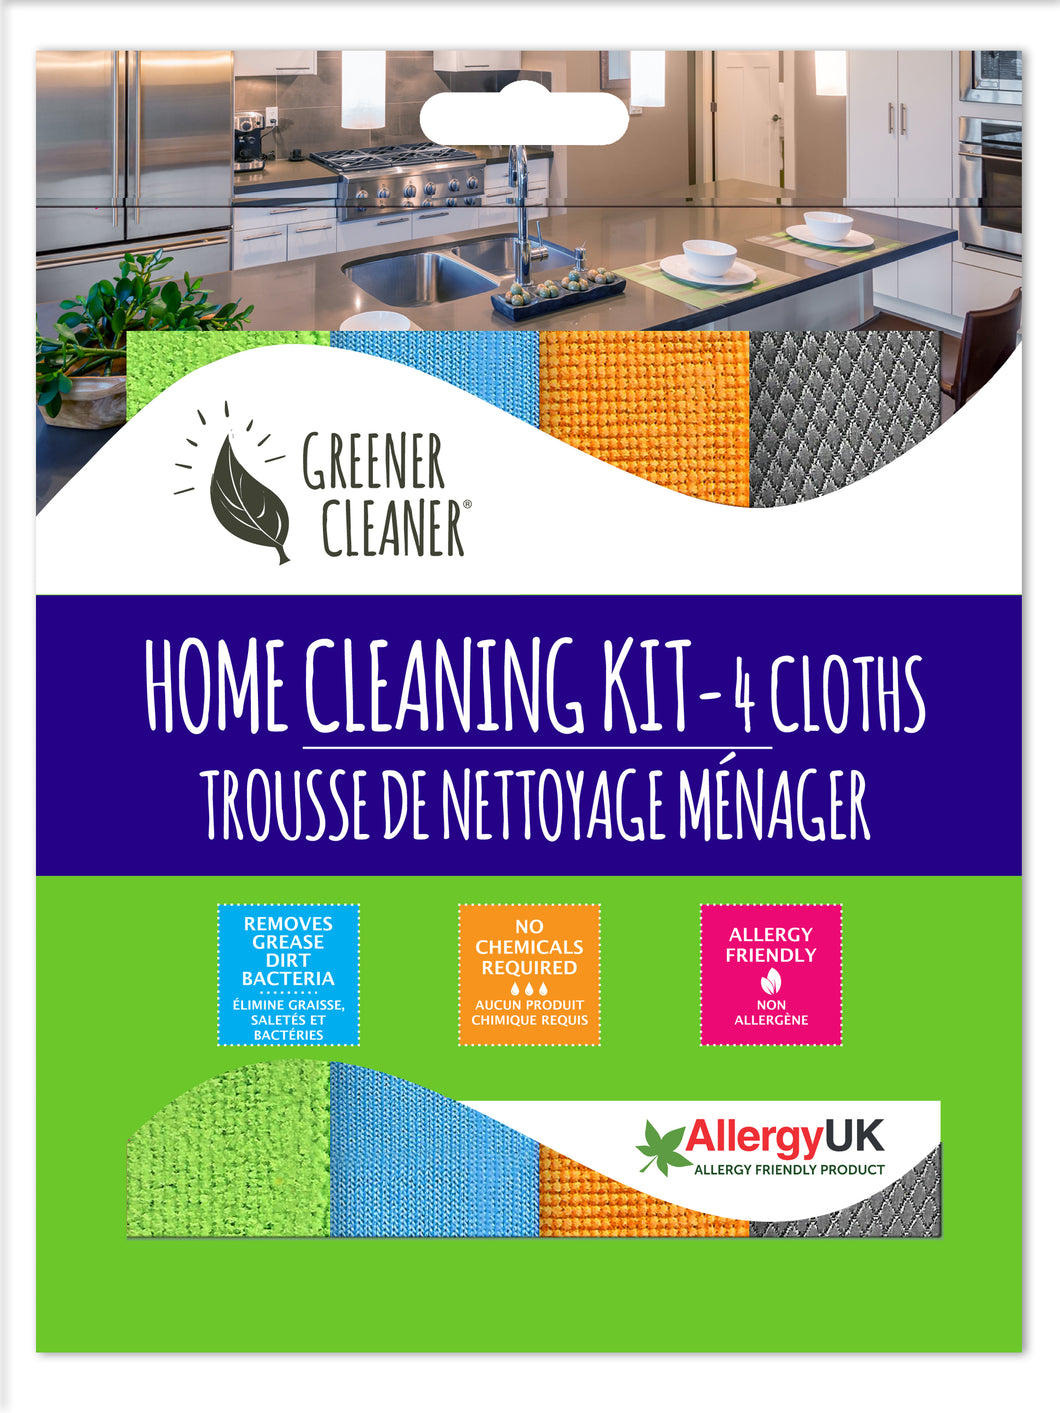 Home Cleaning Kit - 4 Cloth Kit